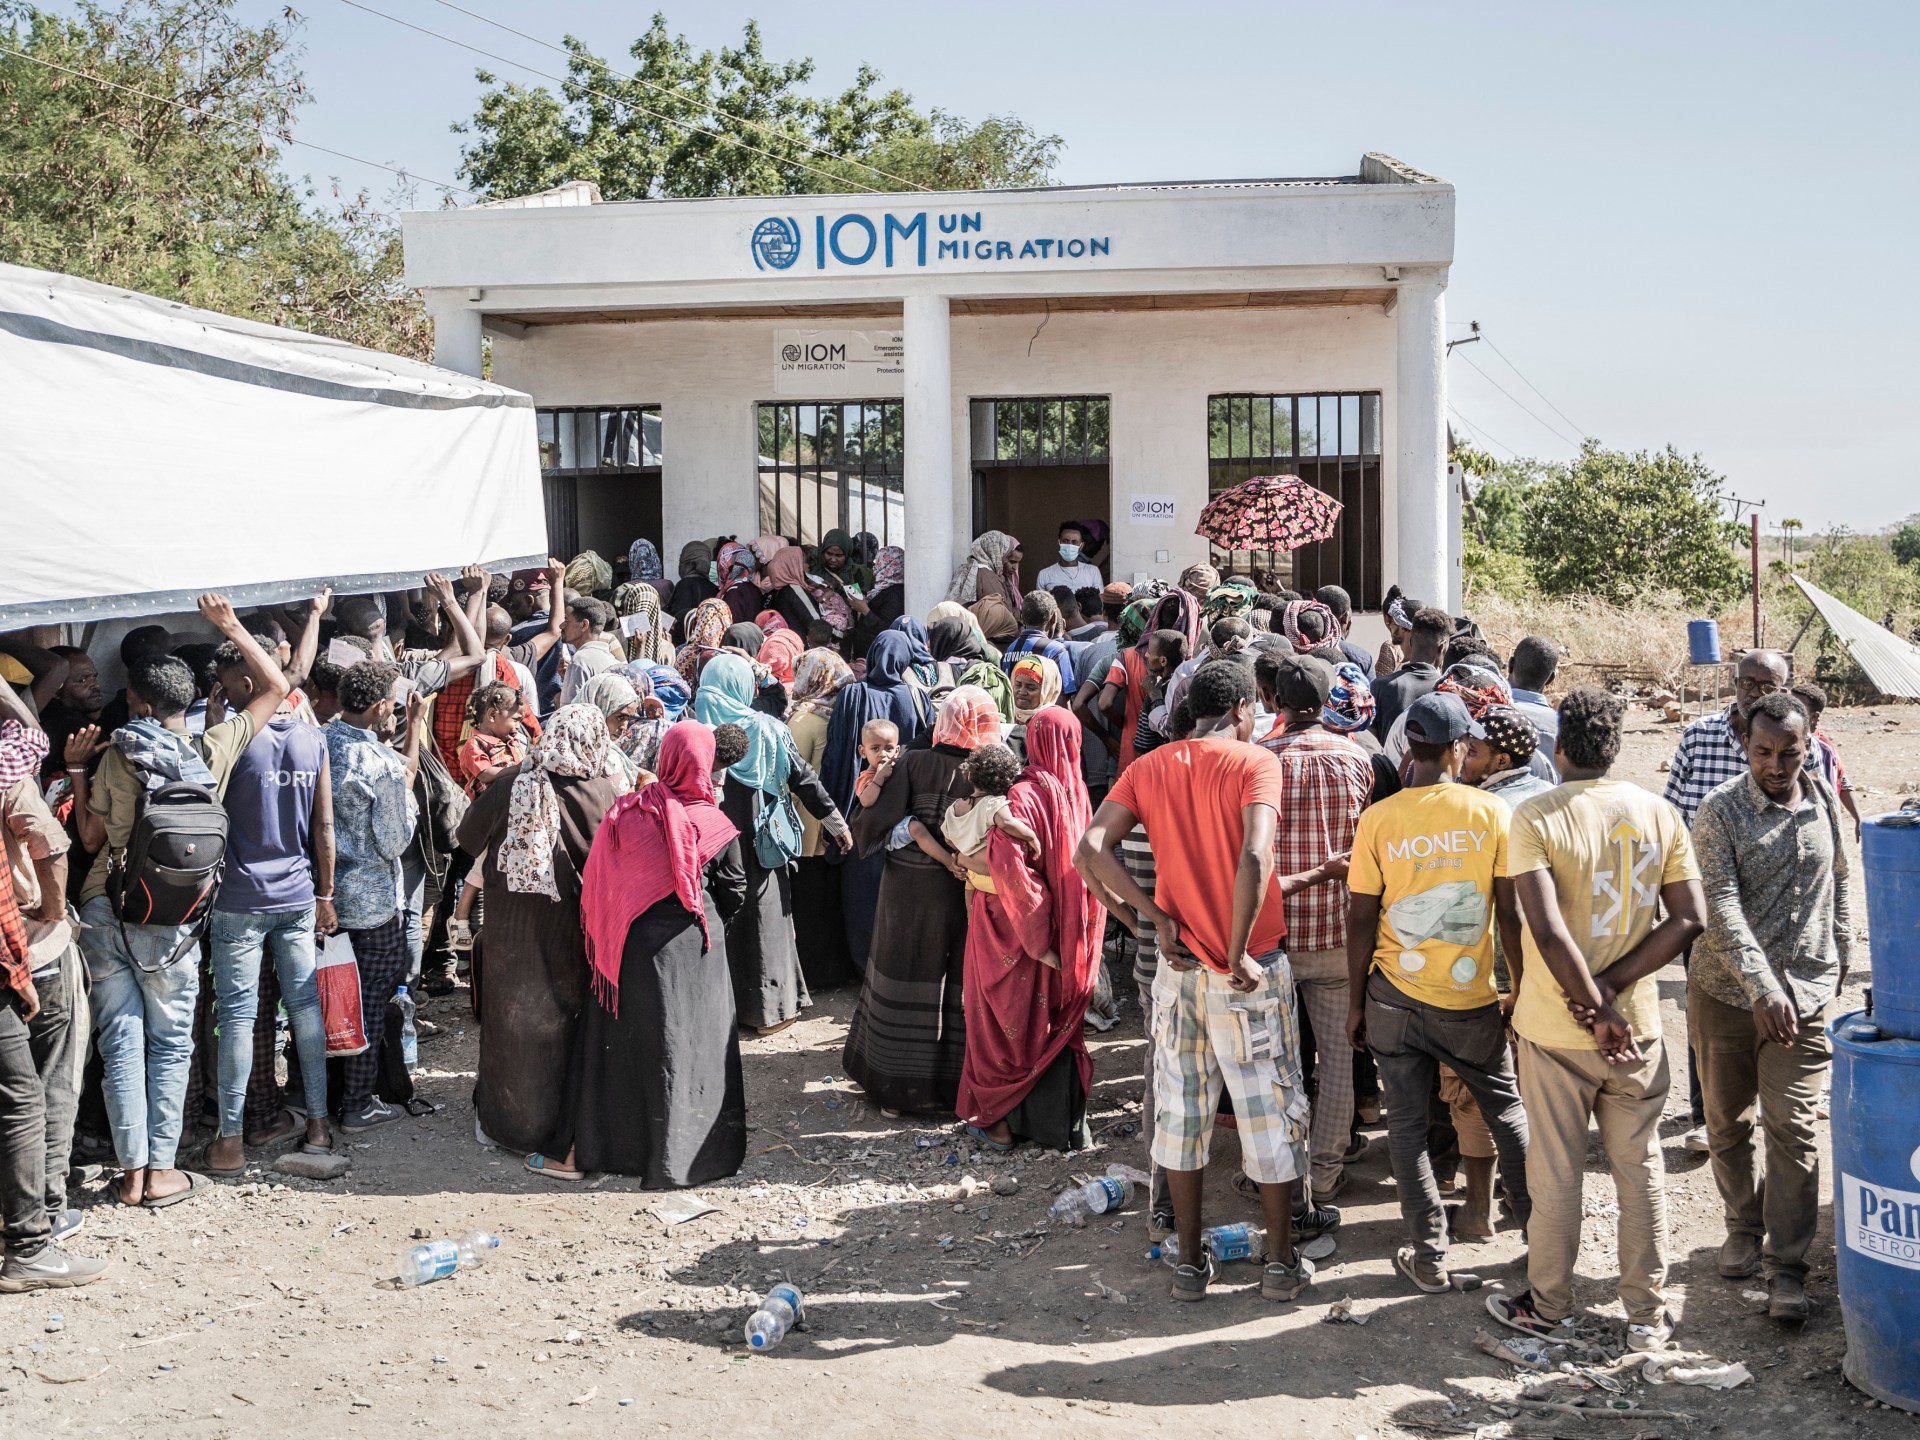 IOM makes ‘global appeal’ for $7.9bn to help 140 million people | Migration News